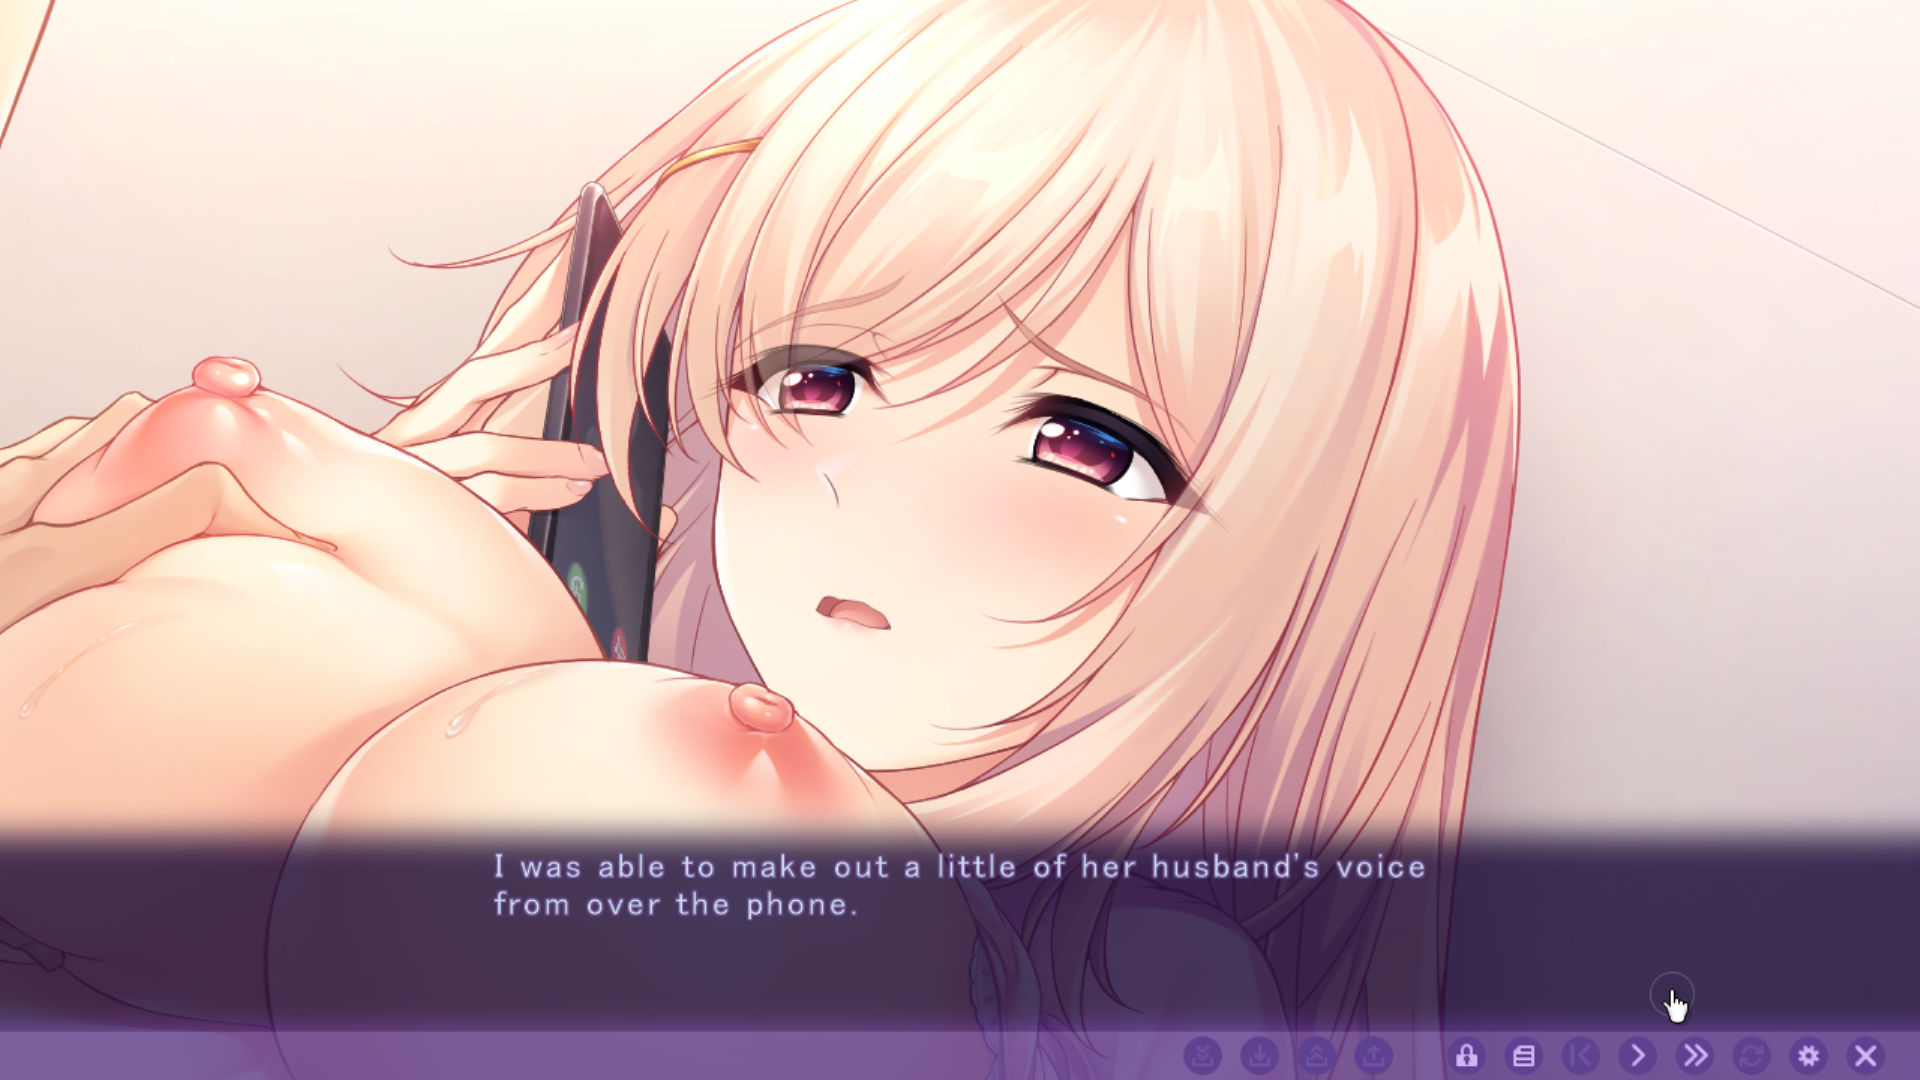 Illicit Love Secret Time with Housewives COMPLETED - free game download, reviews, mega picture